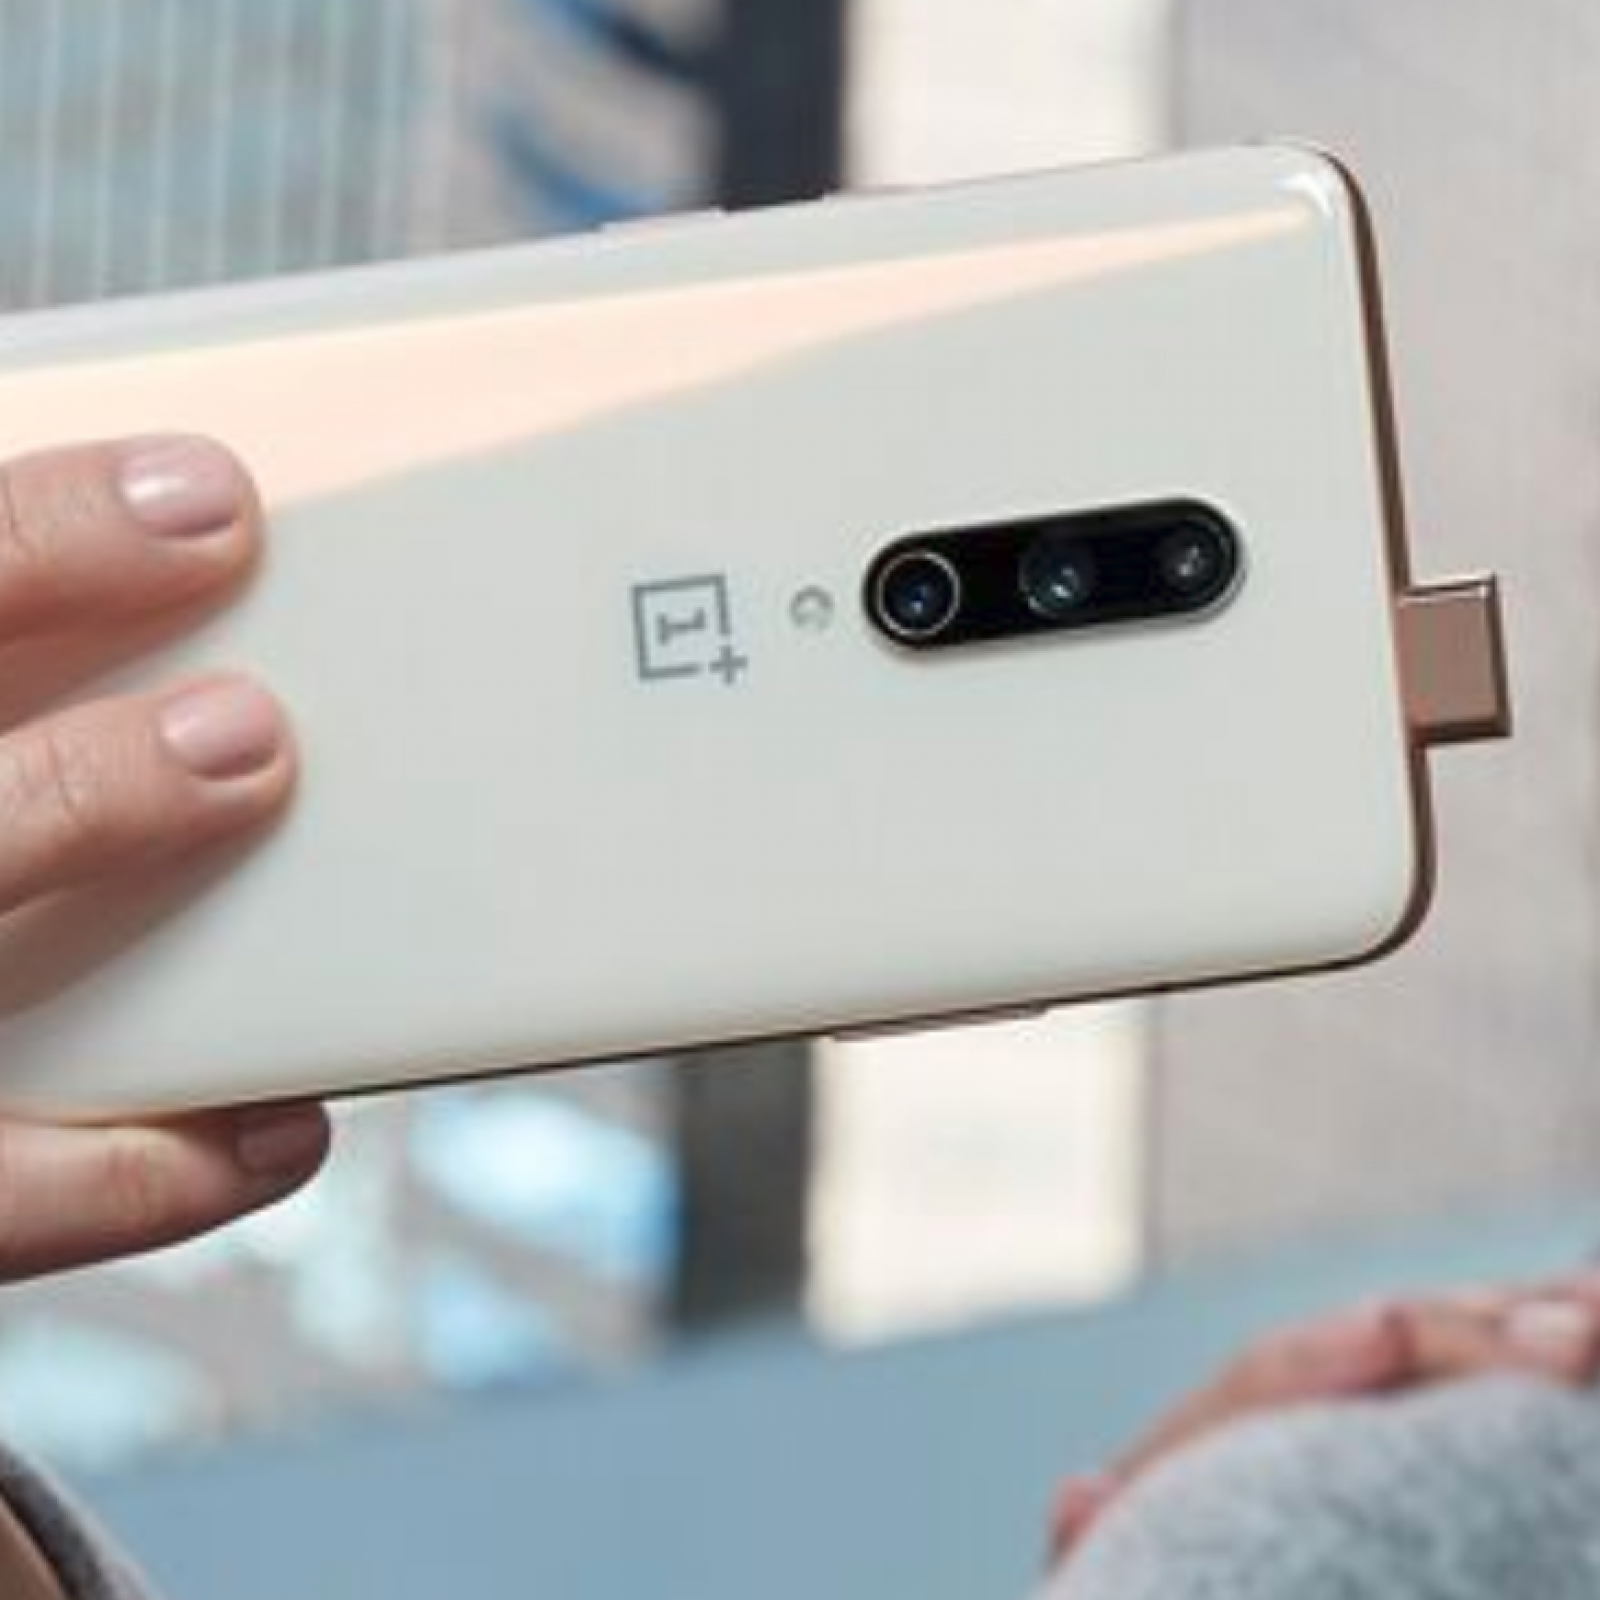 OnePlus 7 Pro and 5G: Pictures, Colors, Specs Revealed—and the Phone Has a Secret Pop-Up Selfie Camera